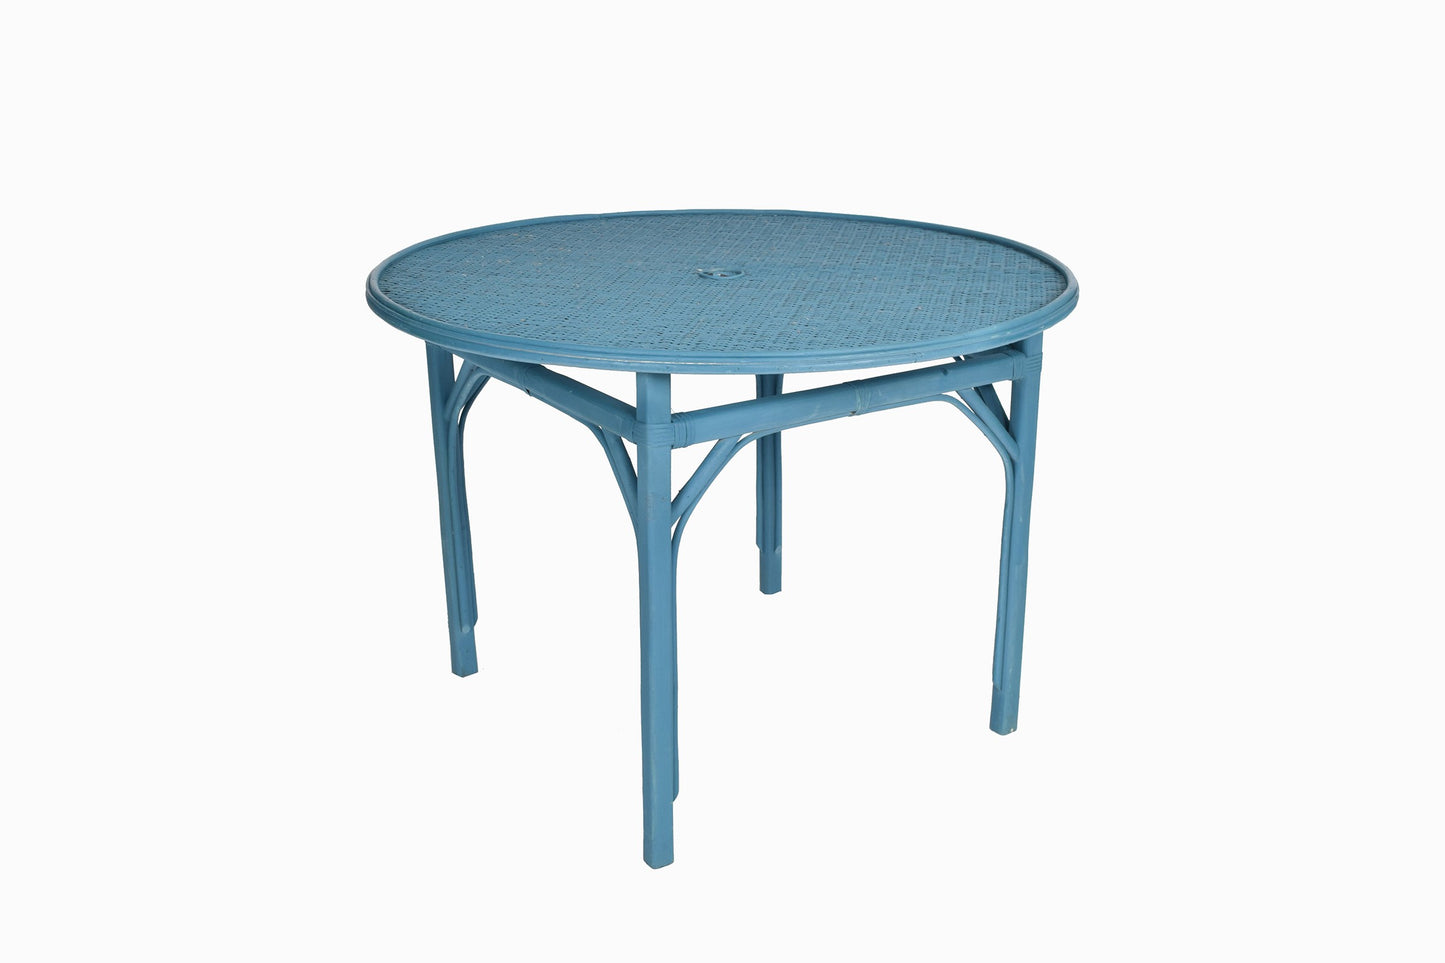 Bentwood and rattan dining table blue